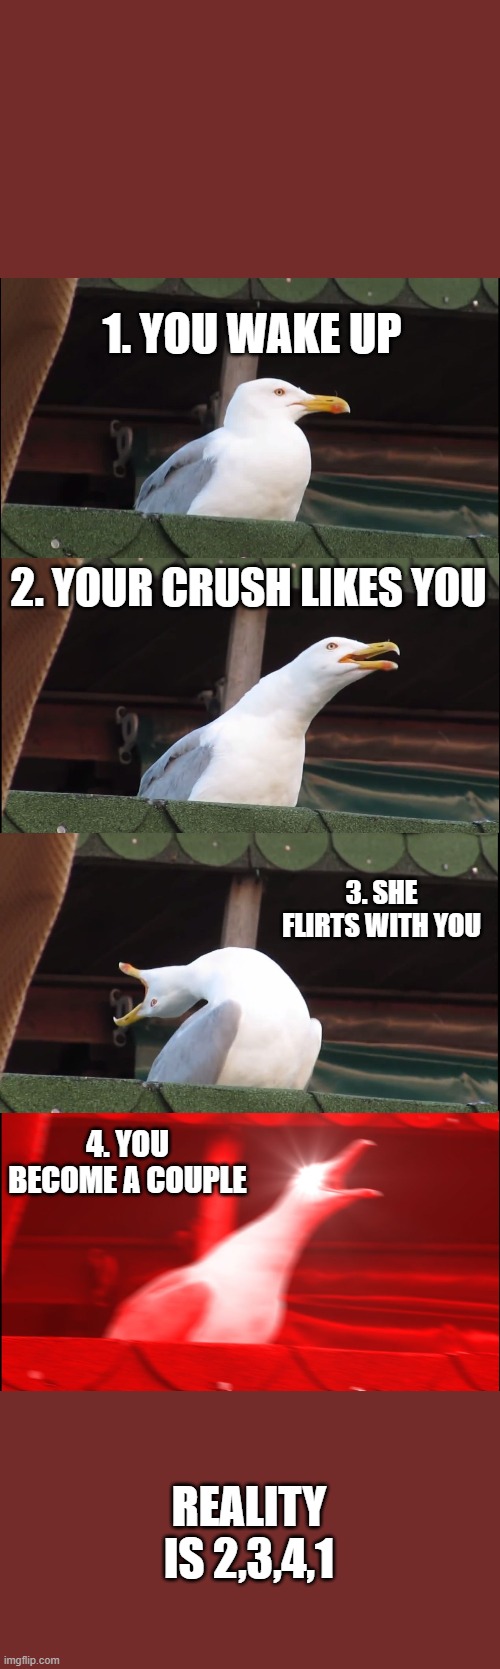 Inhaling Seagull | 1. YOU WAKE UP; 2. YOUR CRUSH LIKES YOU; 3. SHE FLIRTS WITH YOU; 4. YOU BECOME A COUPLE; REALITY IS 2,3,4,1 | image tagged in memes,inhaling seagull | made w/ Imgflip meme maker